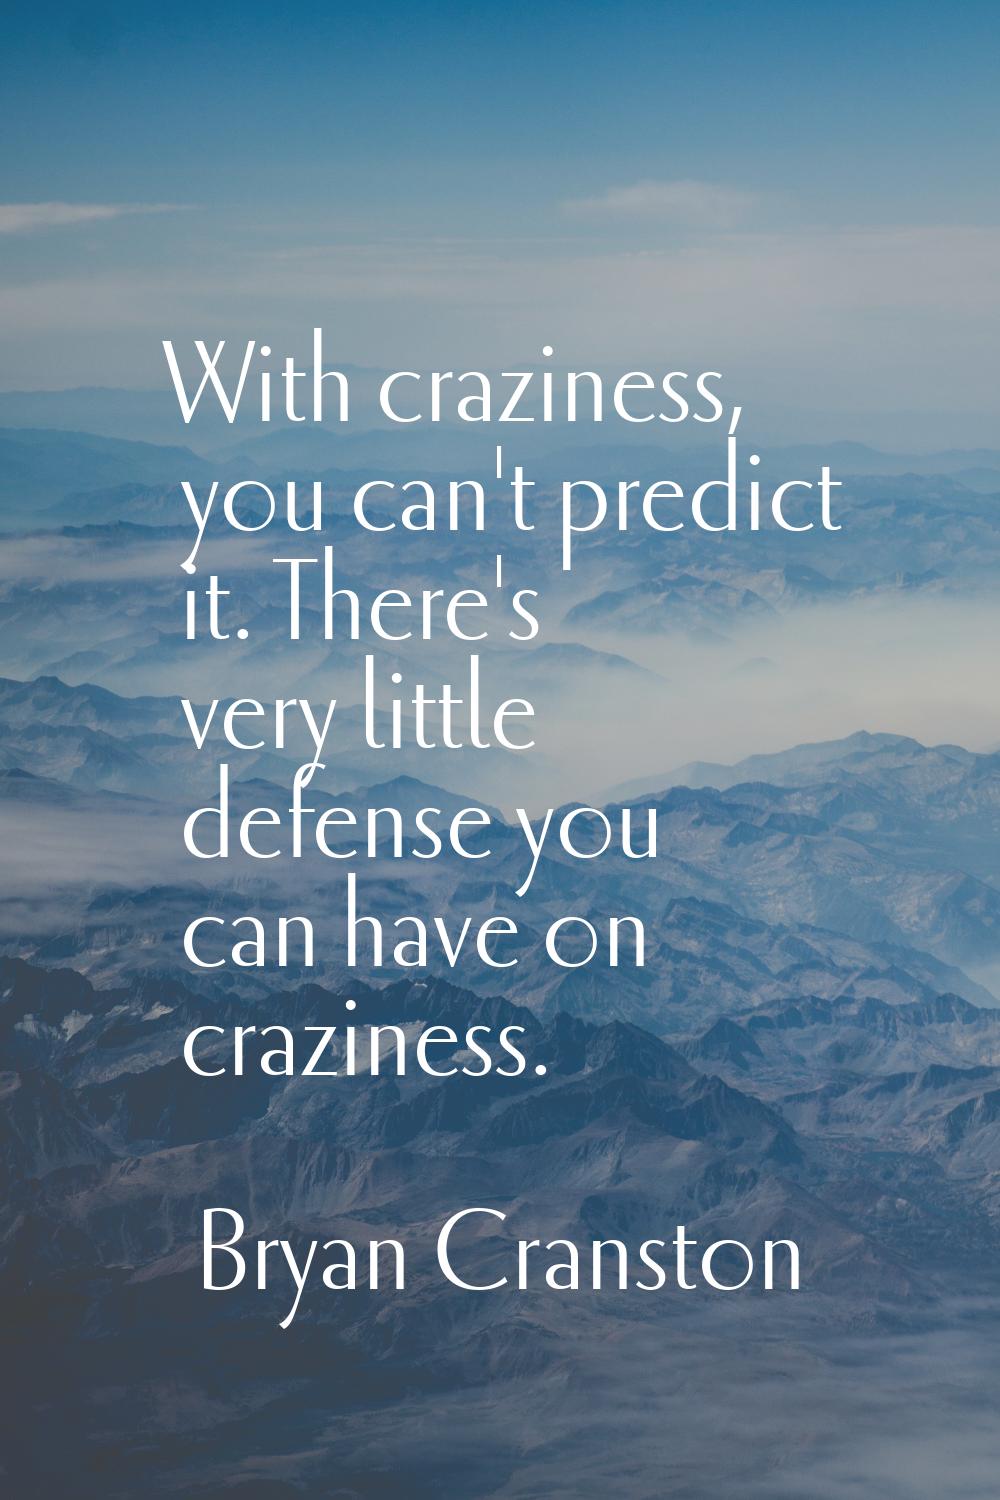 With craziness, you can't predict it. There's very little defense you can have on craziness.